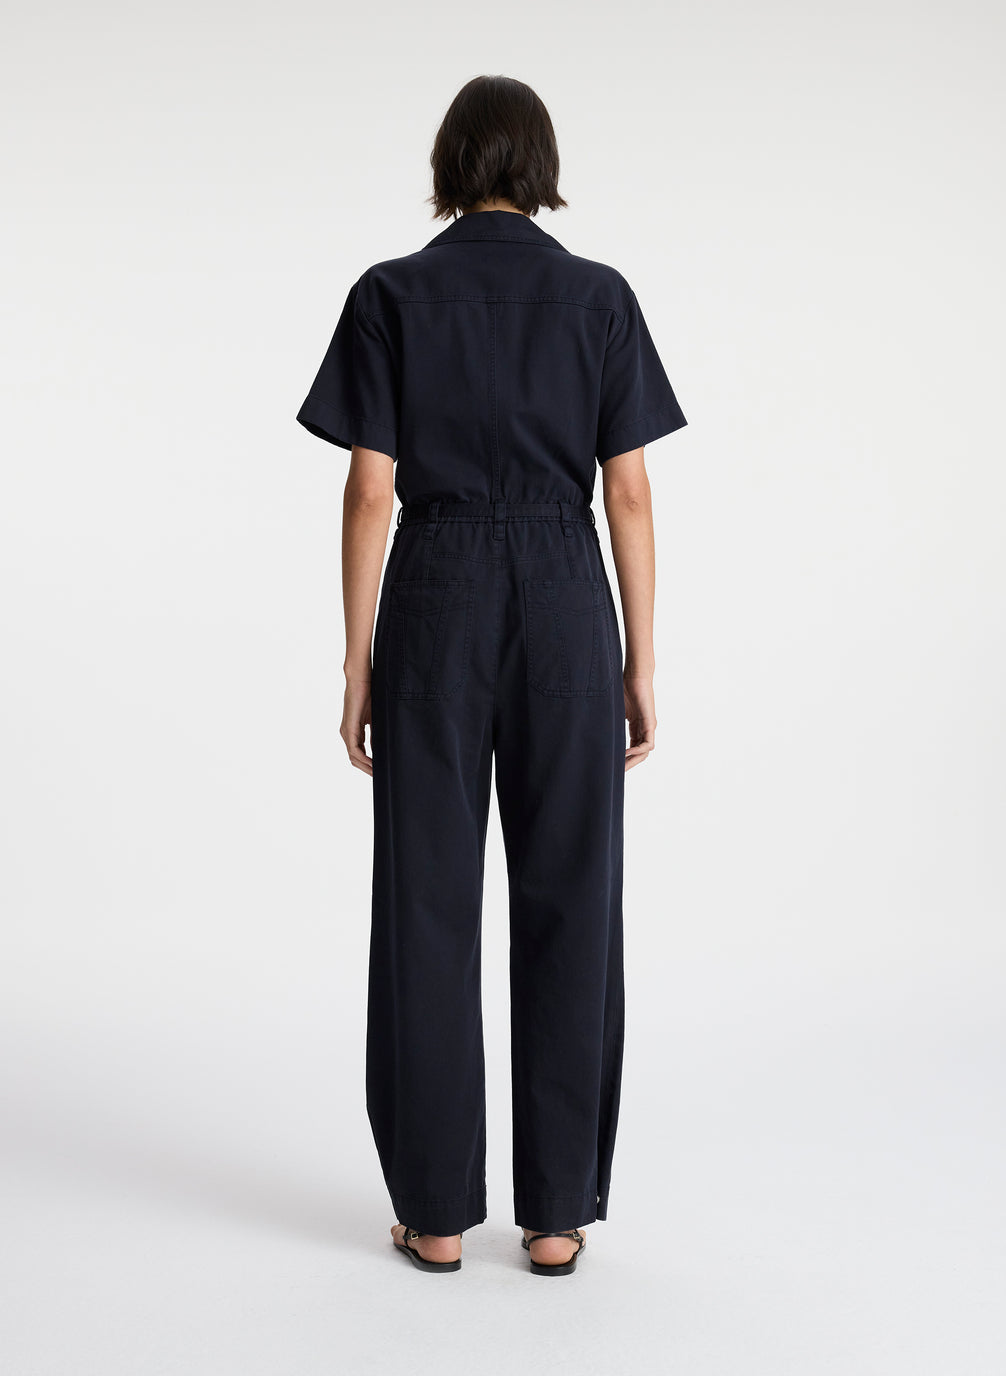 back view of woman in short sleeve navy blue jumpsuit